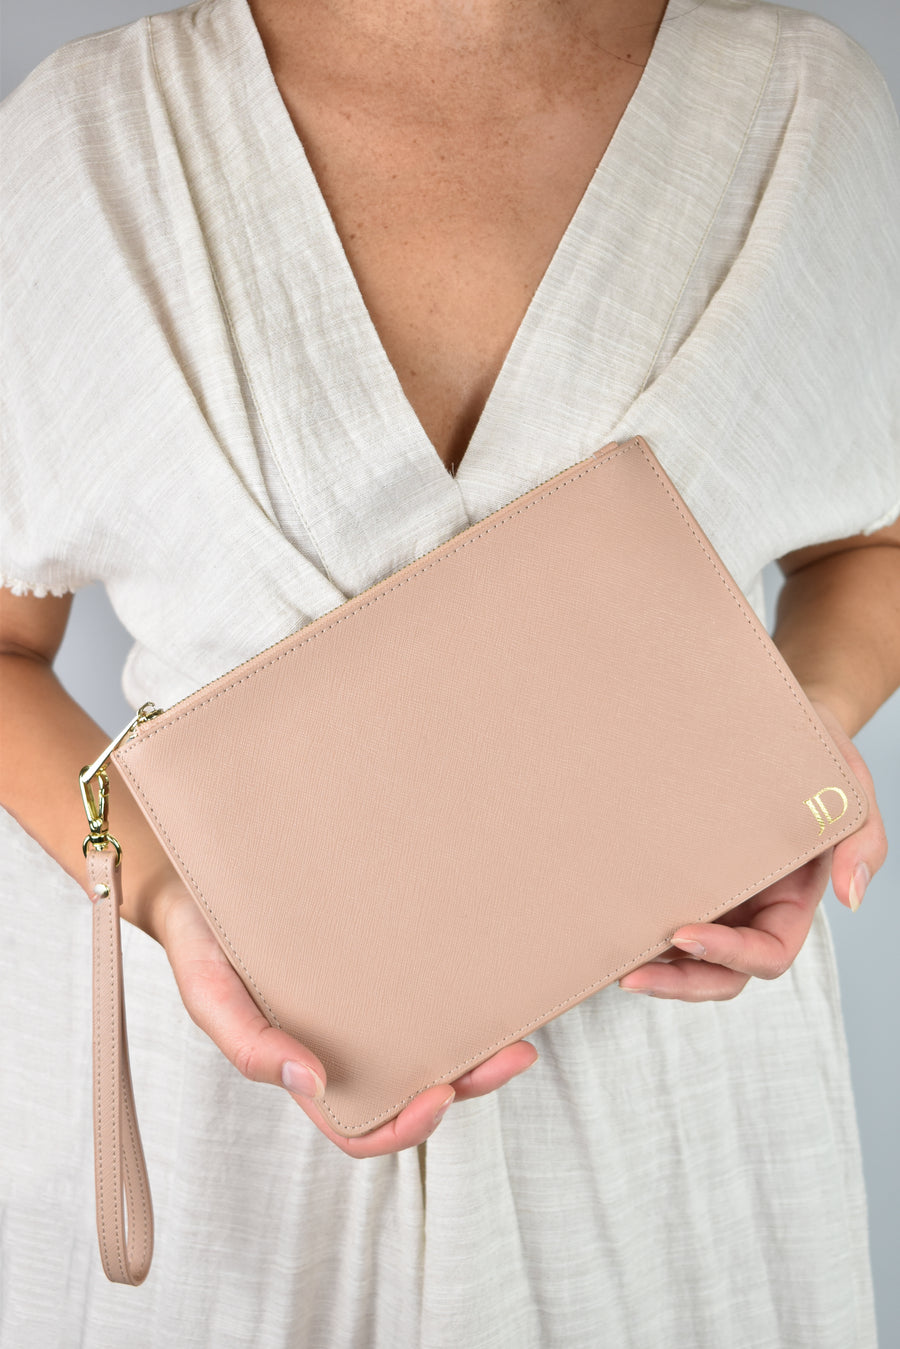 Personalised Leather Clutch - Sandy Beige